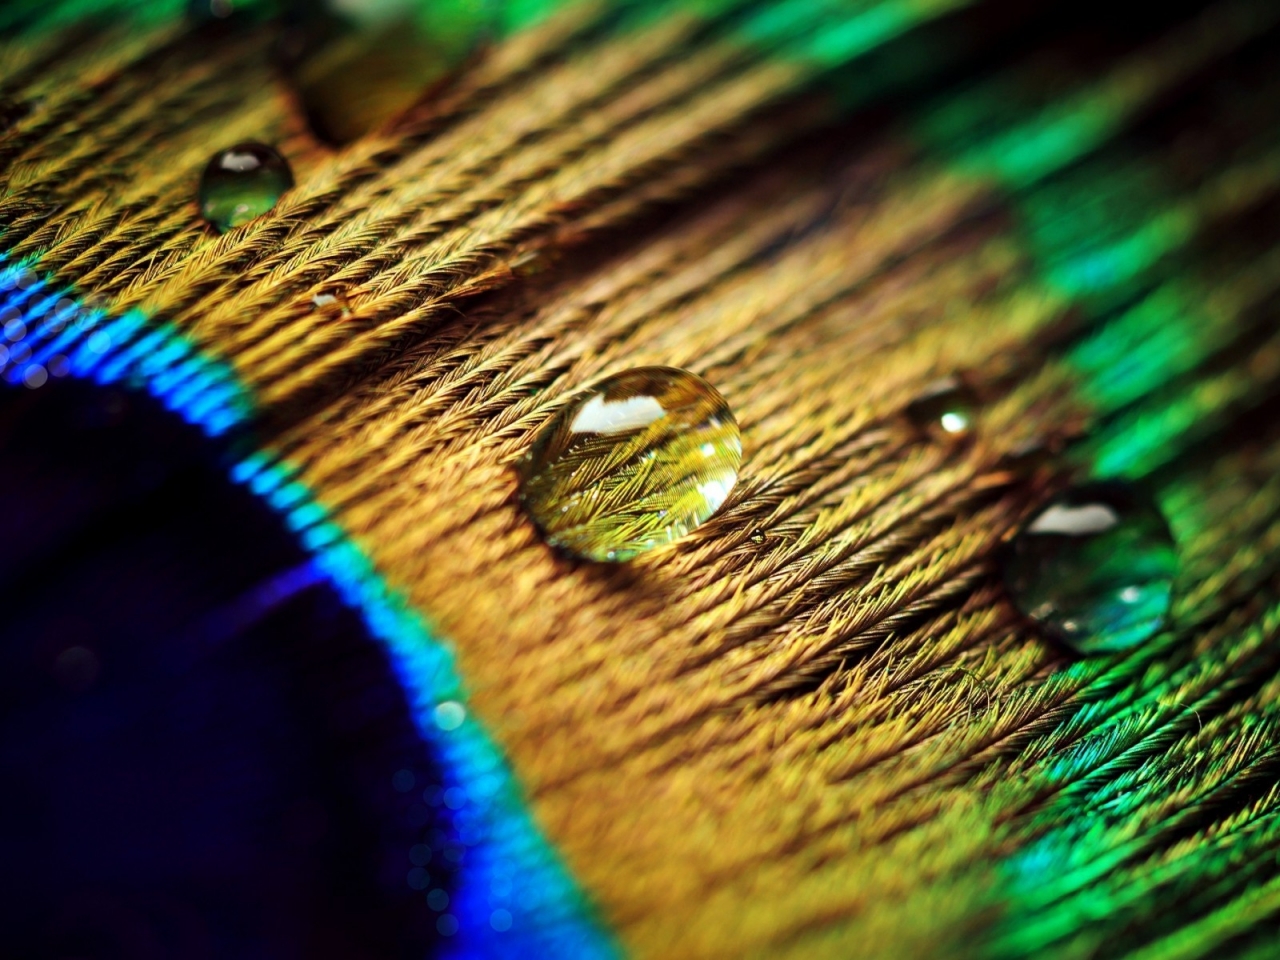 Peacock Feather Drops for 1280 x 960 resolution